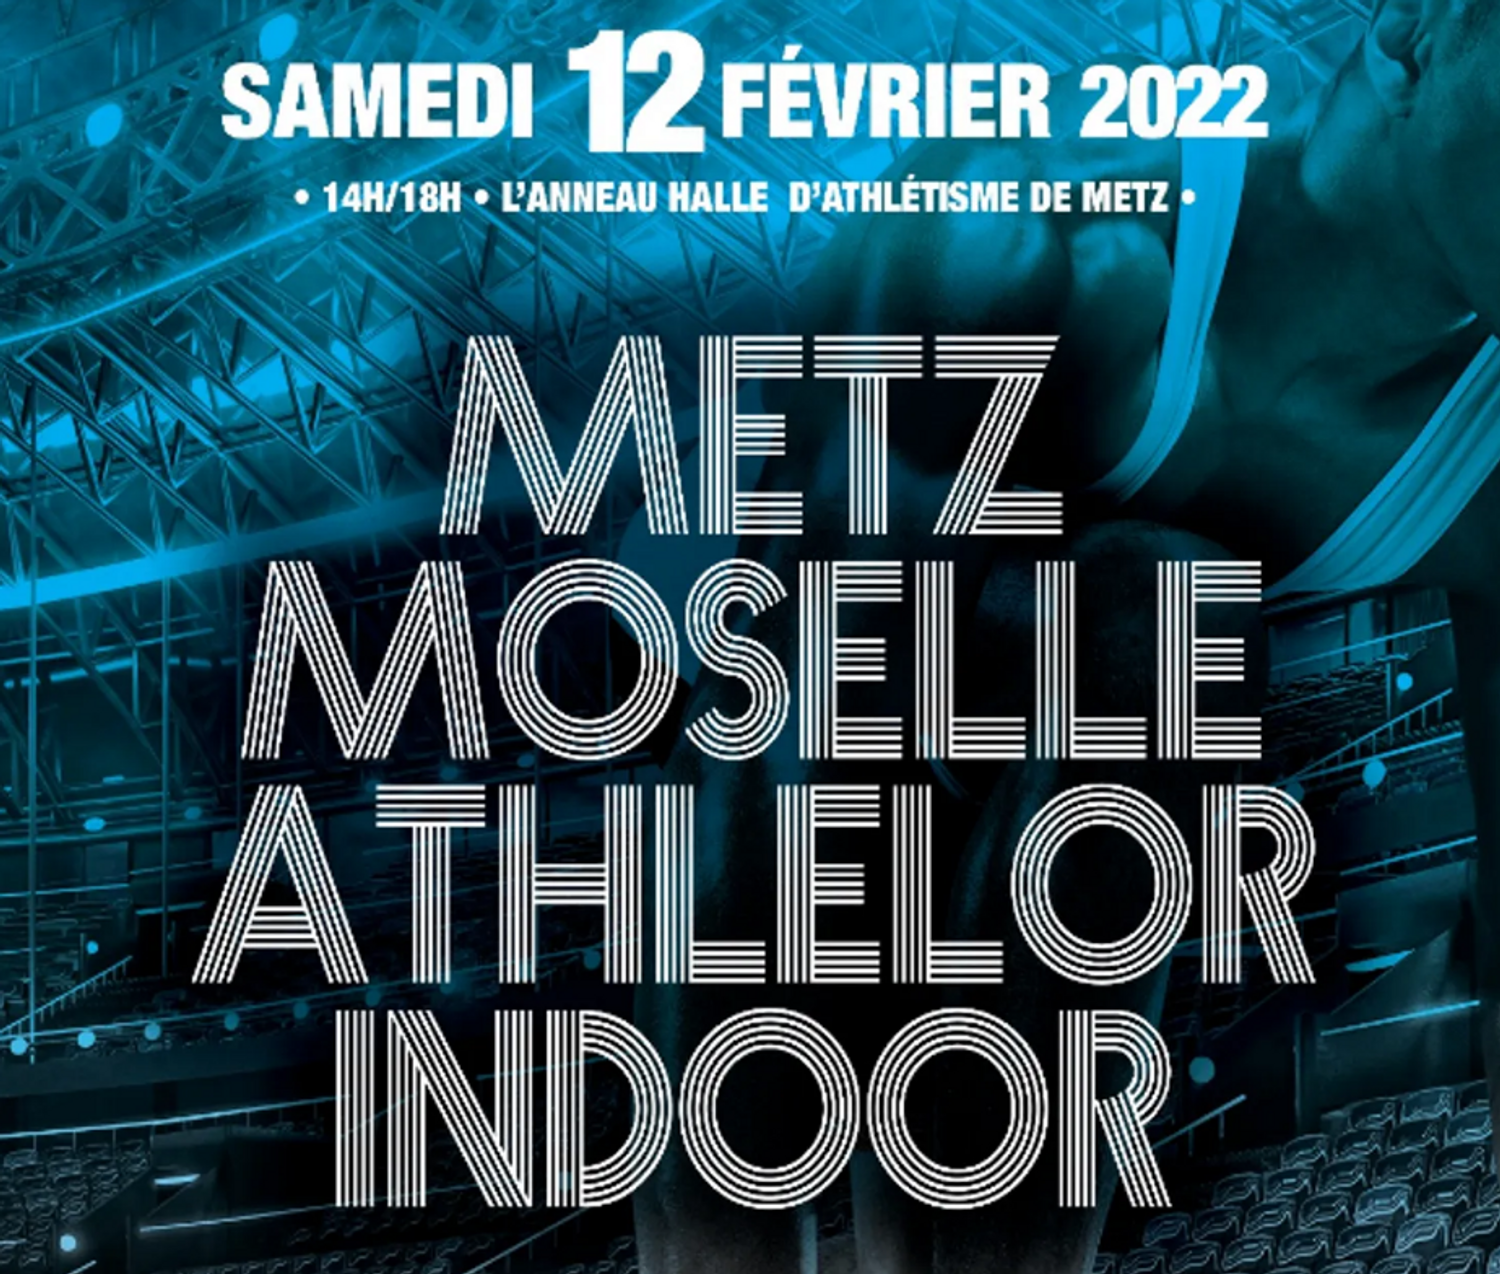 Metz Moselle Athlelor Indoor